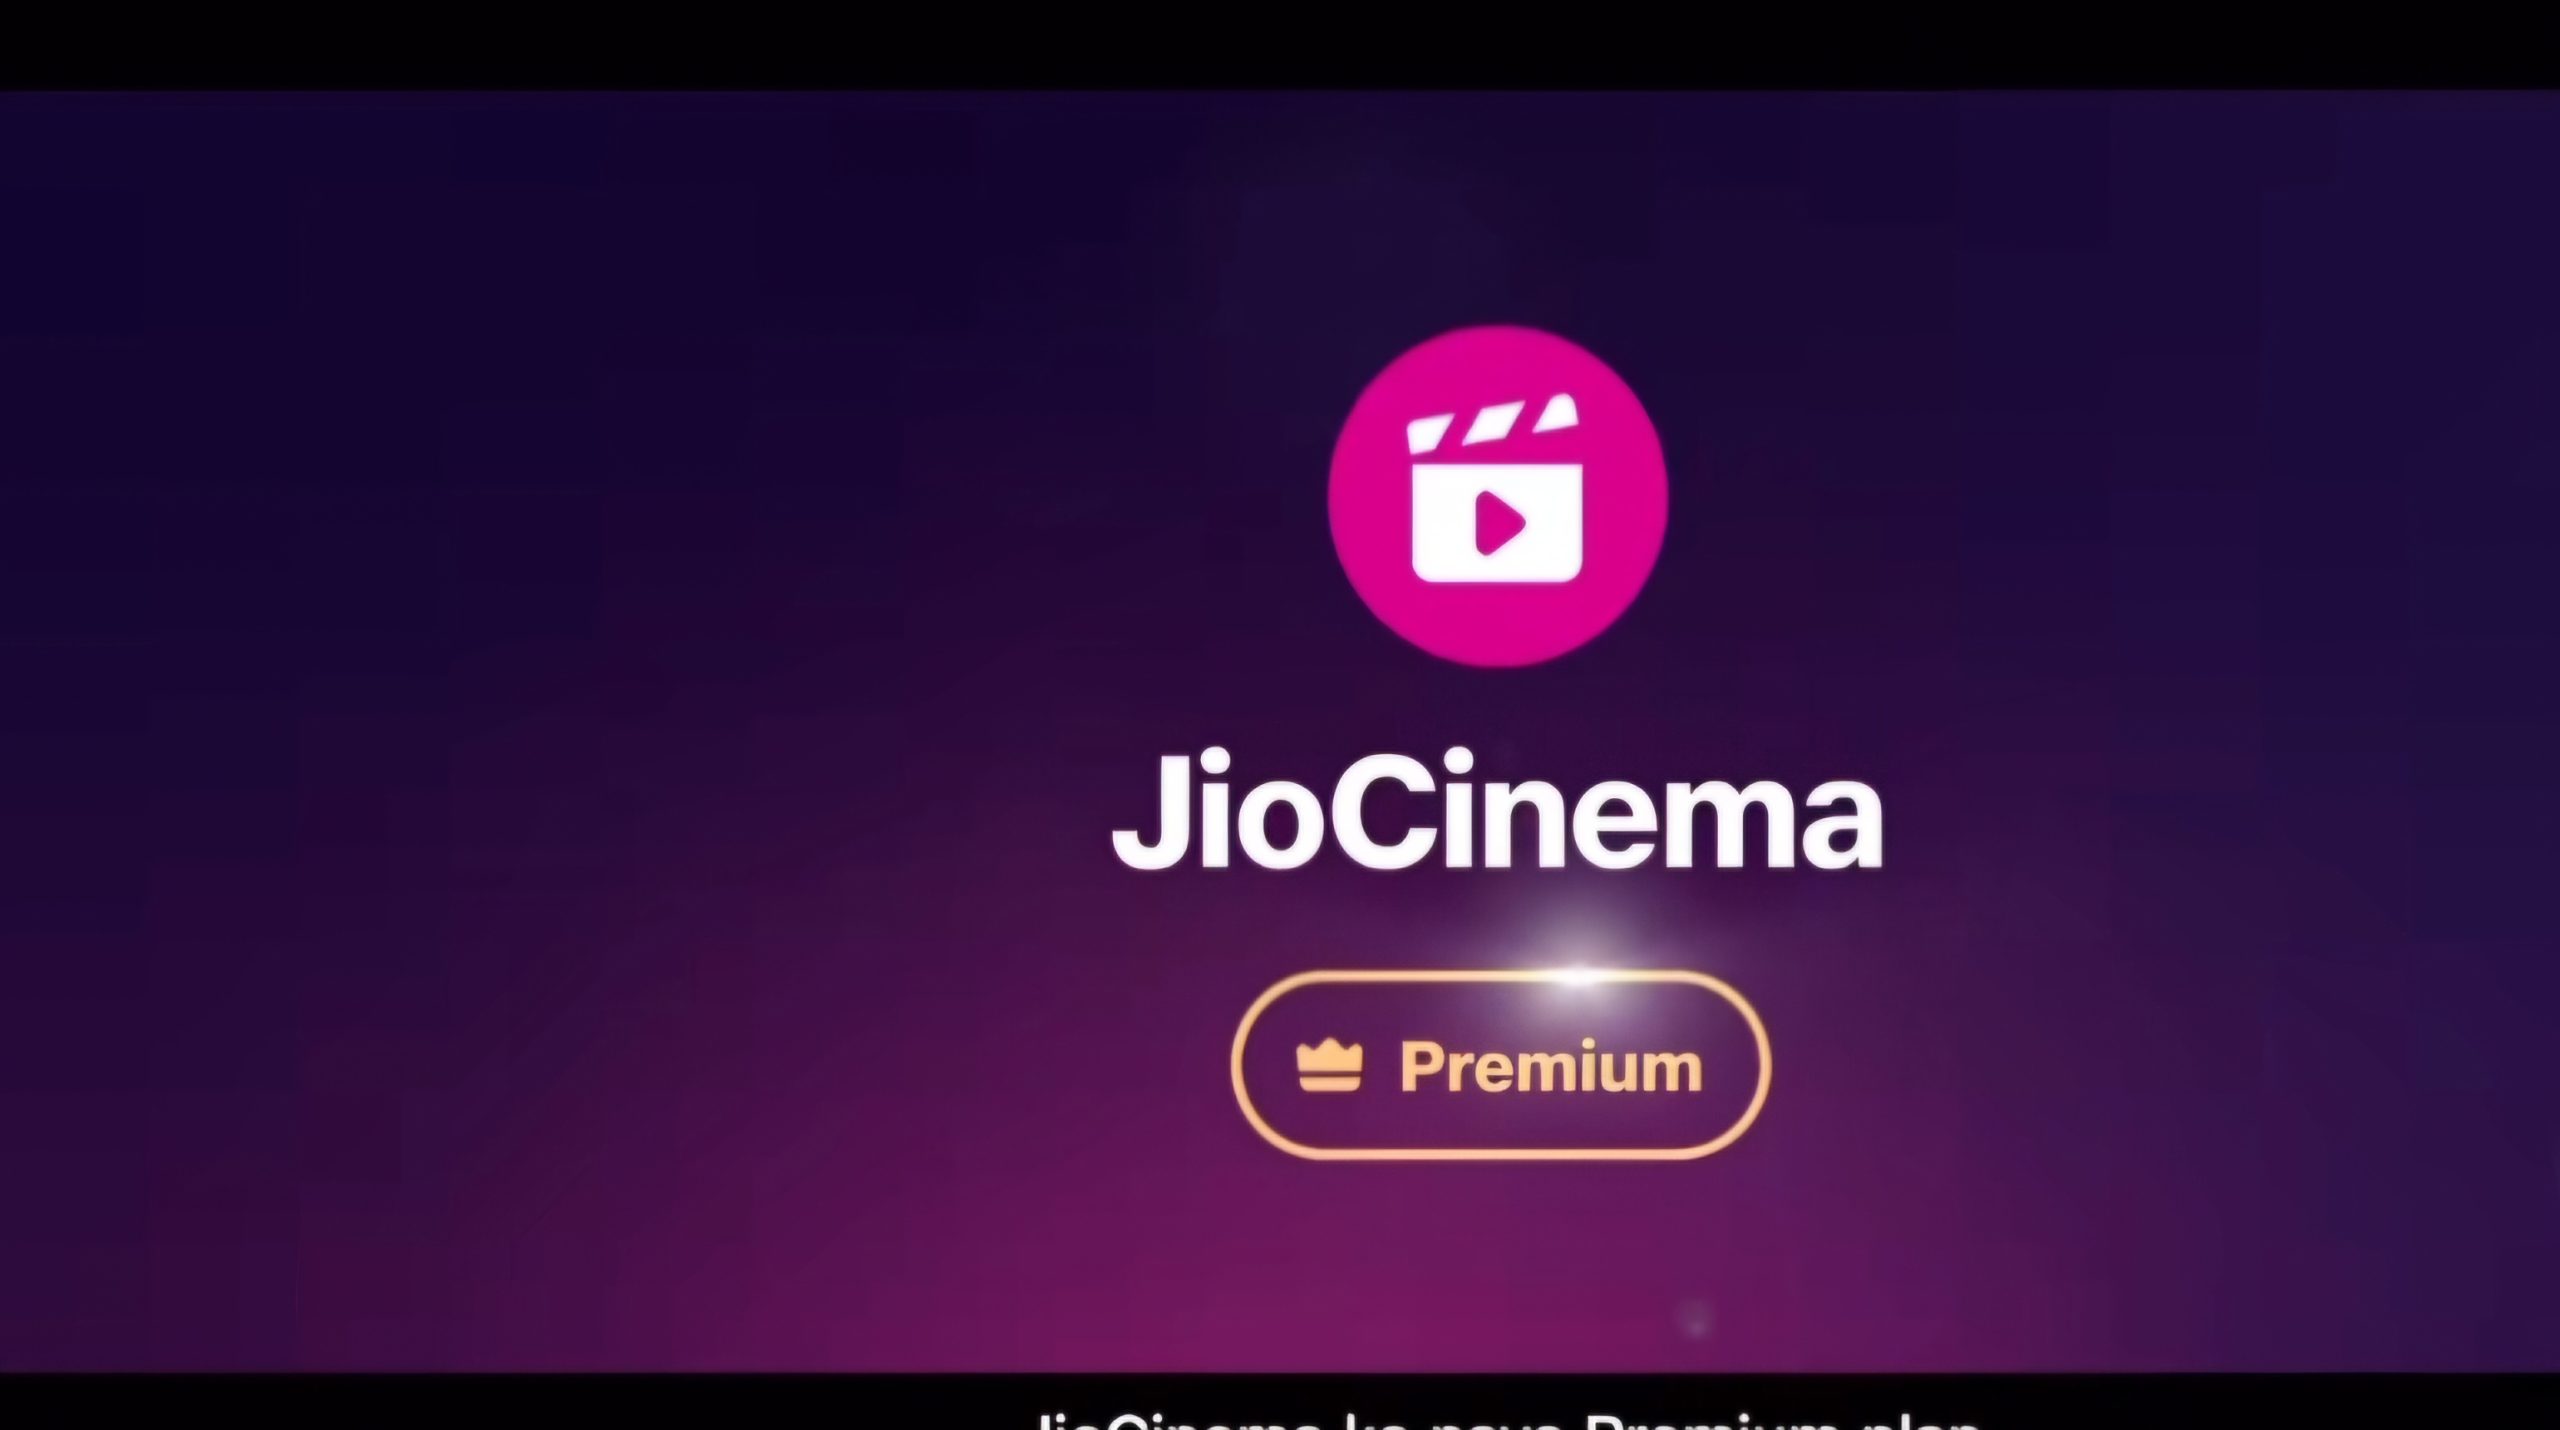 Want to watch serials and shows before TV premiere? Check out JioCinema Premium offer!